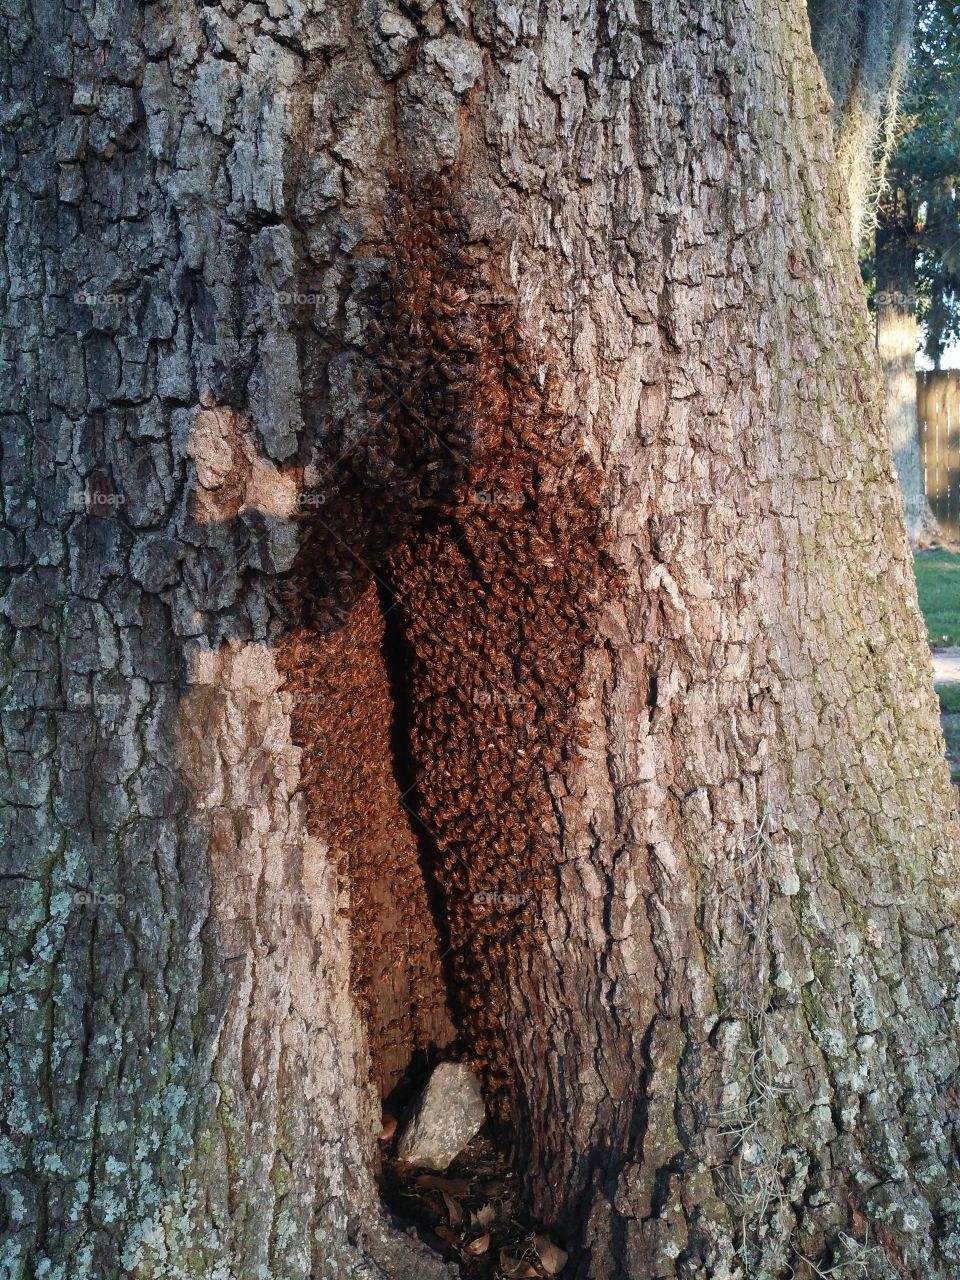 Bees in a Tree. Bees taking over a hollow in a sweet gum tree .